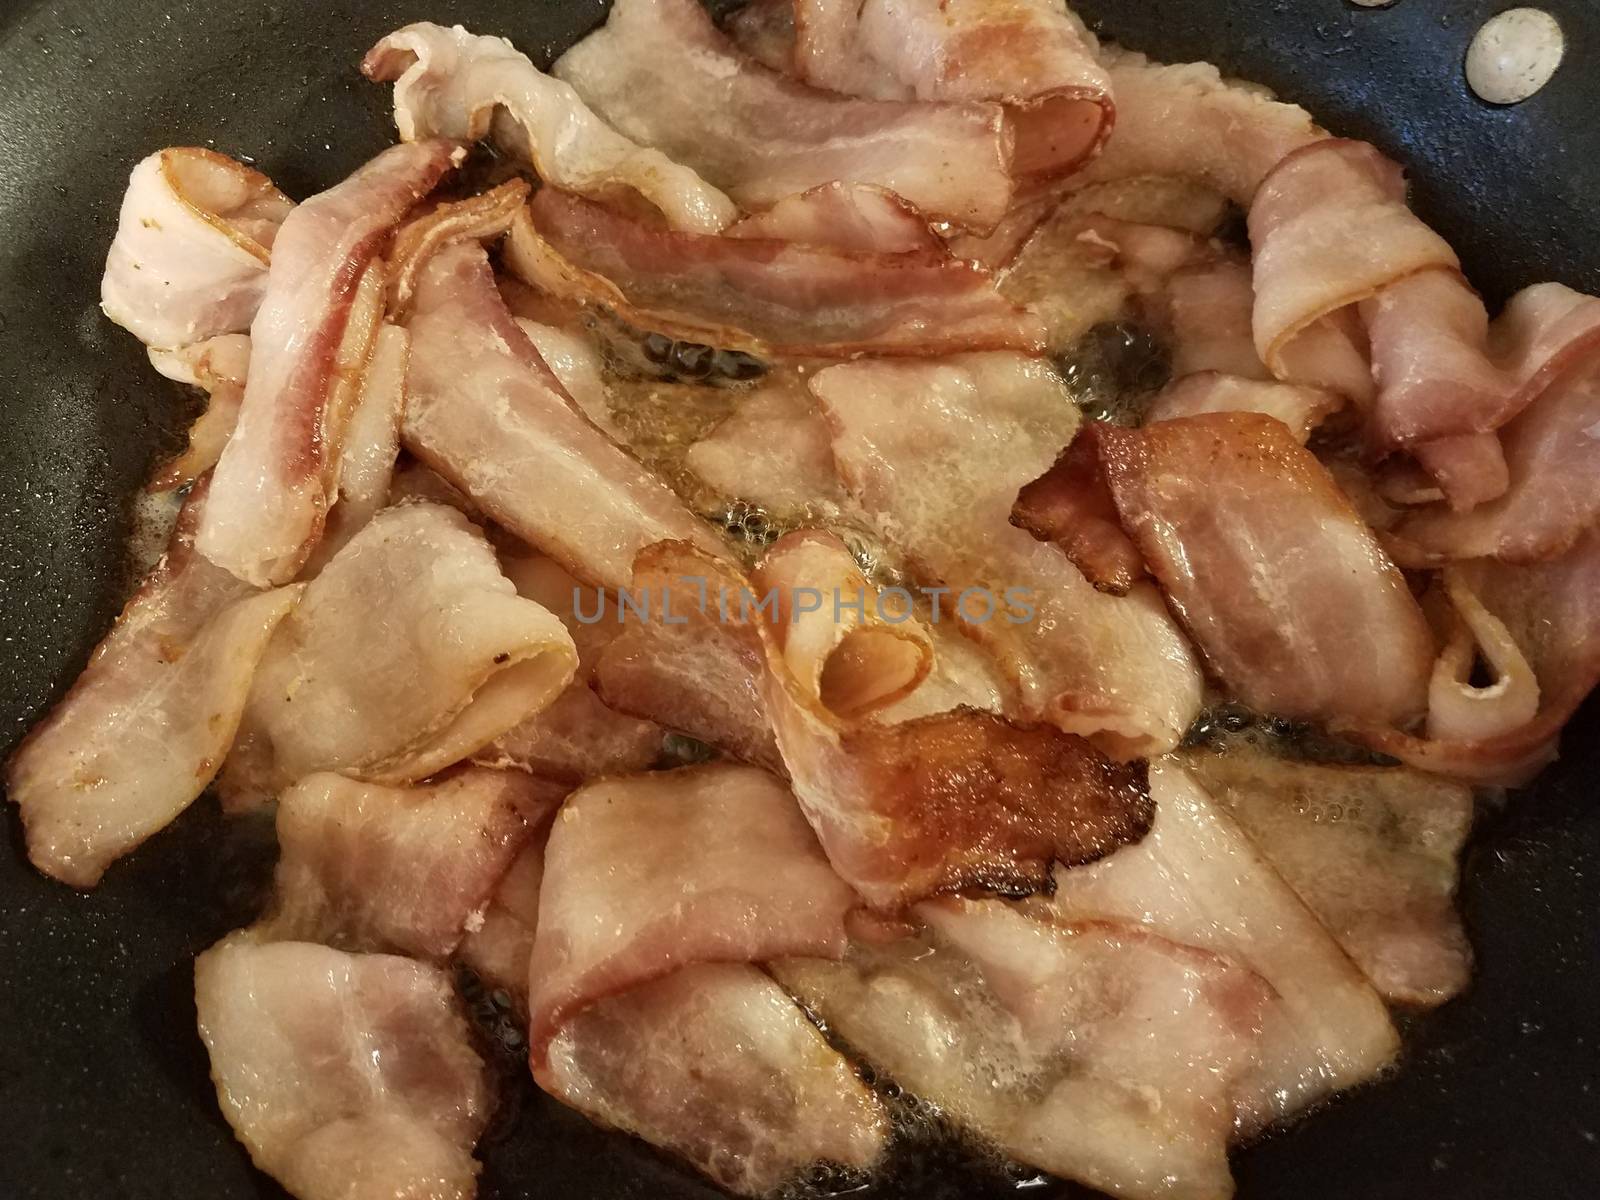 bacon cooking in frying pan or skillet on stove by stockphotofan1